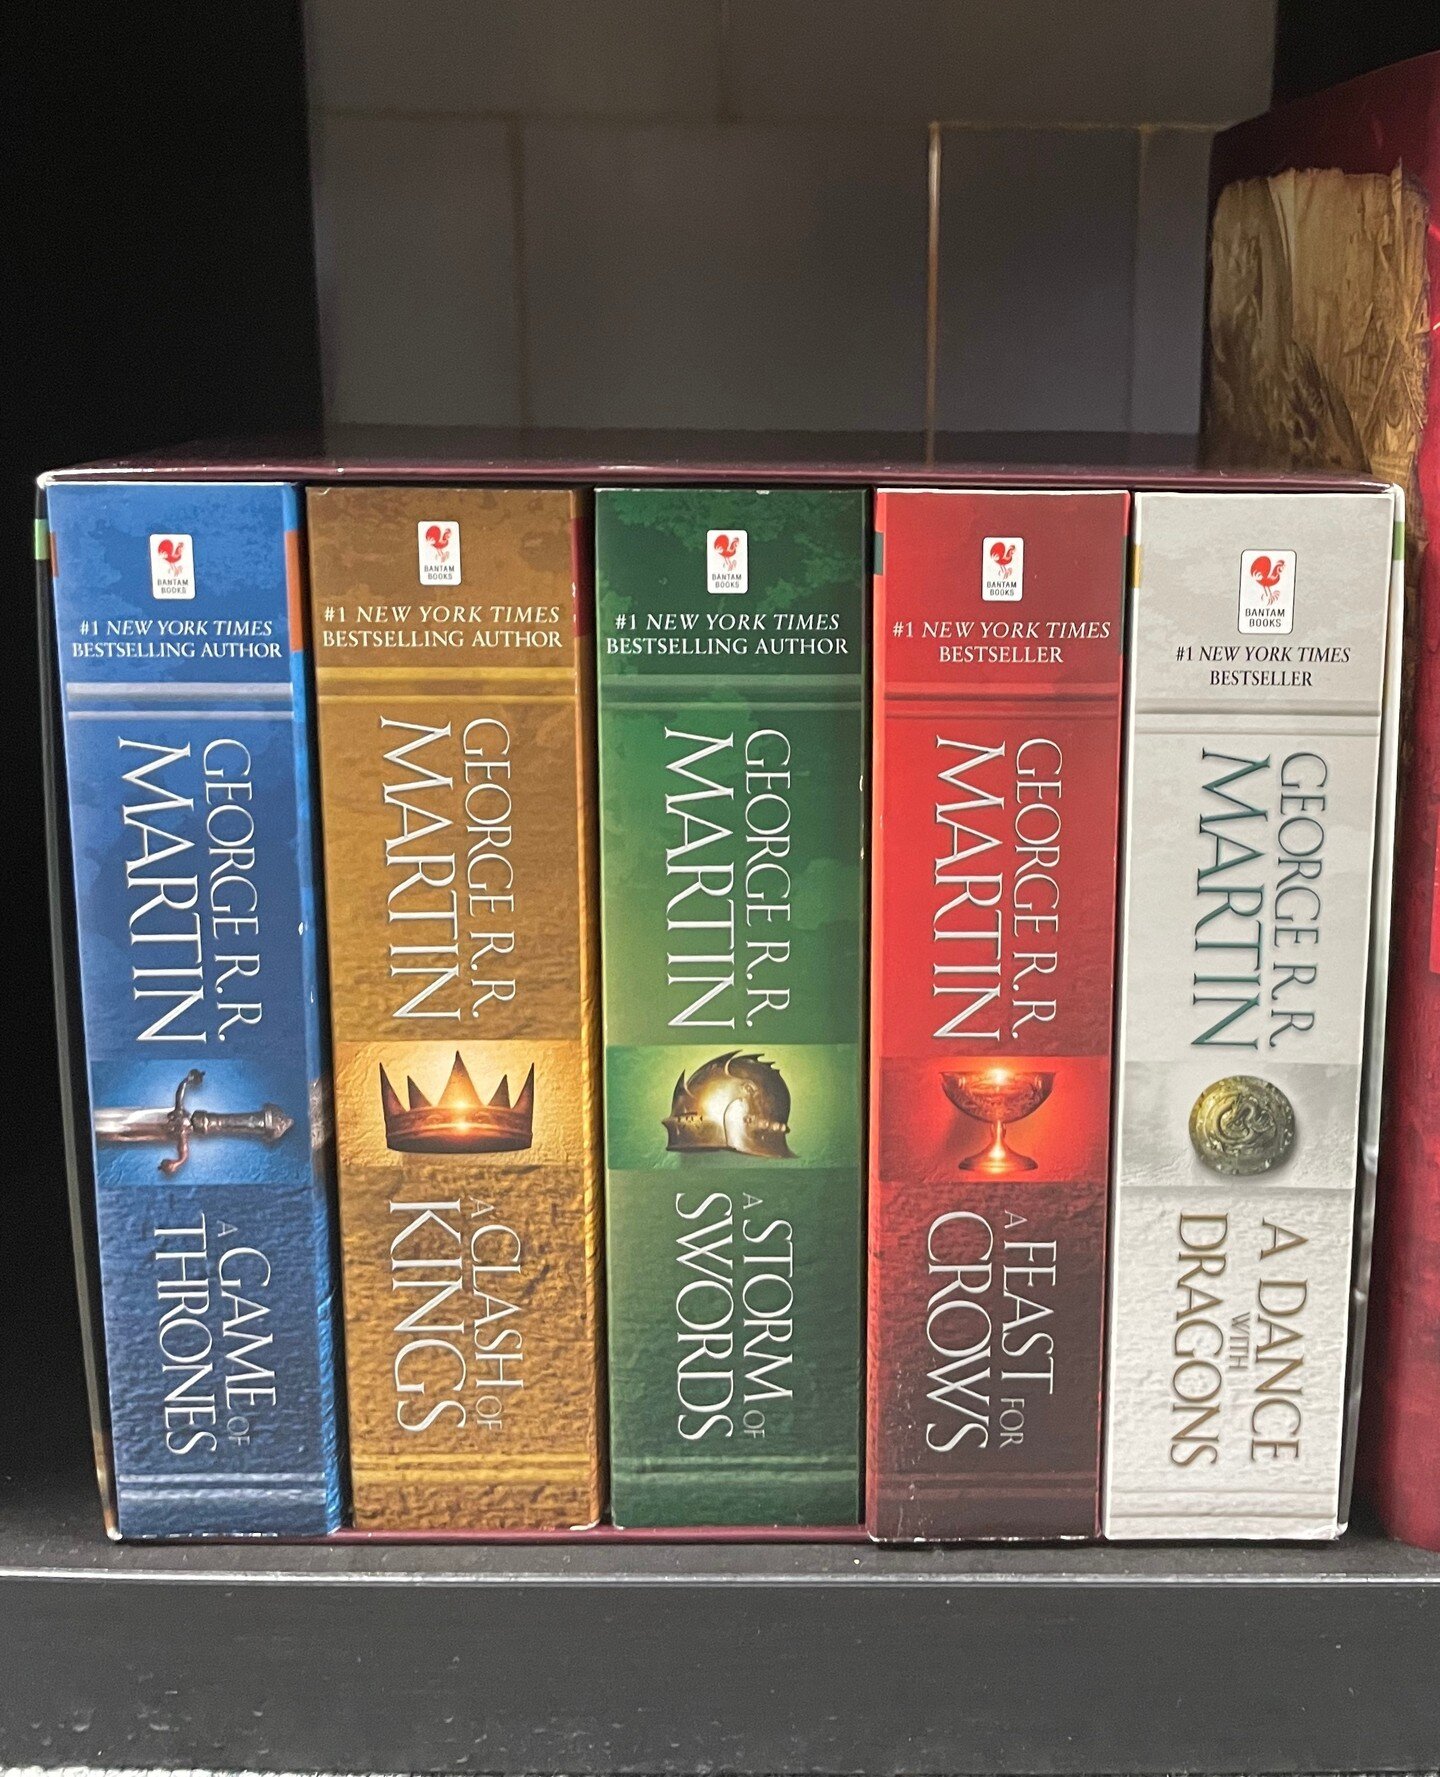 In the Game of Thrones, you live or you die. That simple.⁠
⁠
A lot of folks watched the HBO hit show 'The Game of Thrones' but not too many can say they have this George R.R. Martin set tho.⁠
⁠
[Read a full description of this book at the PAGES Trg B